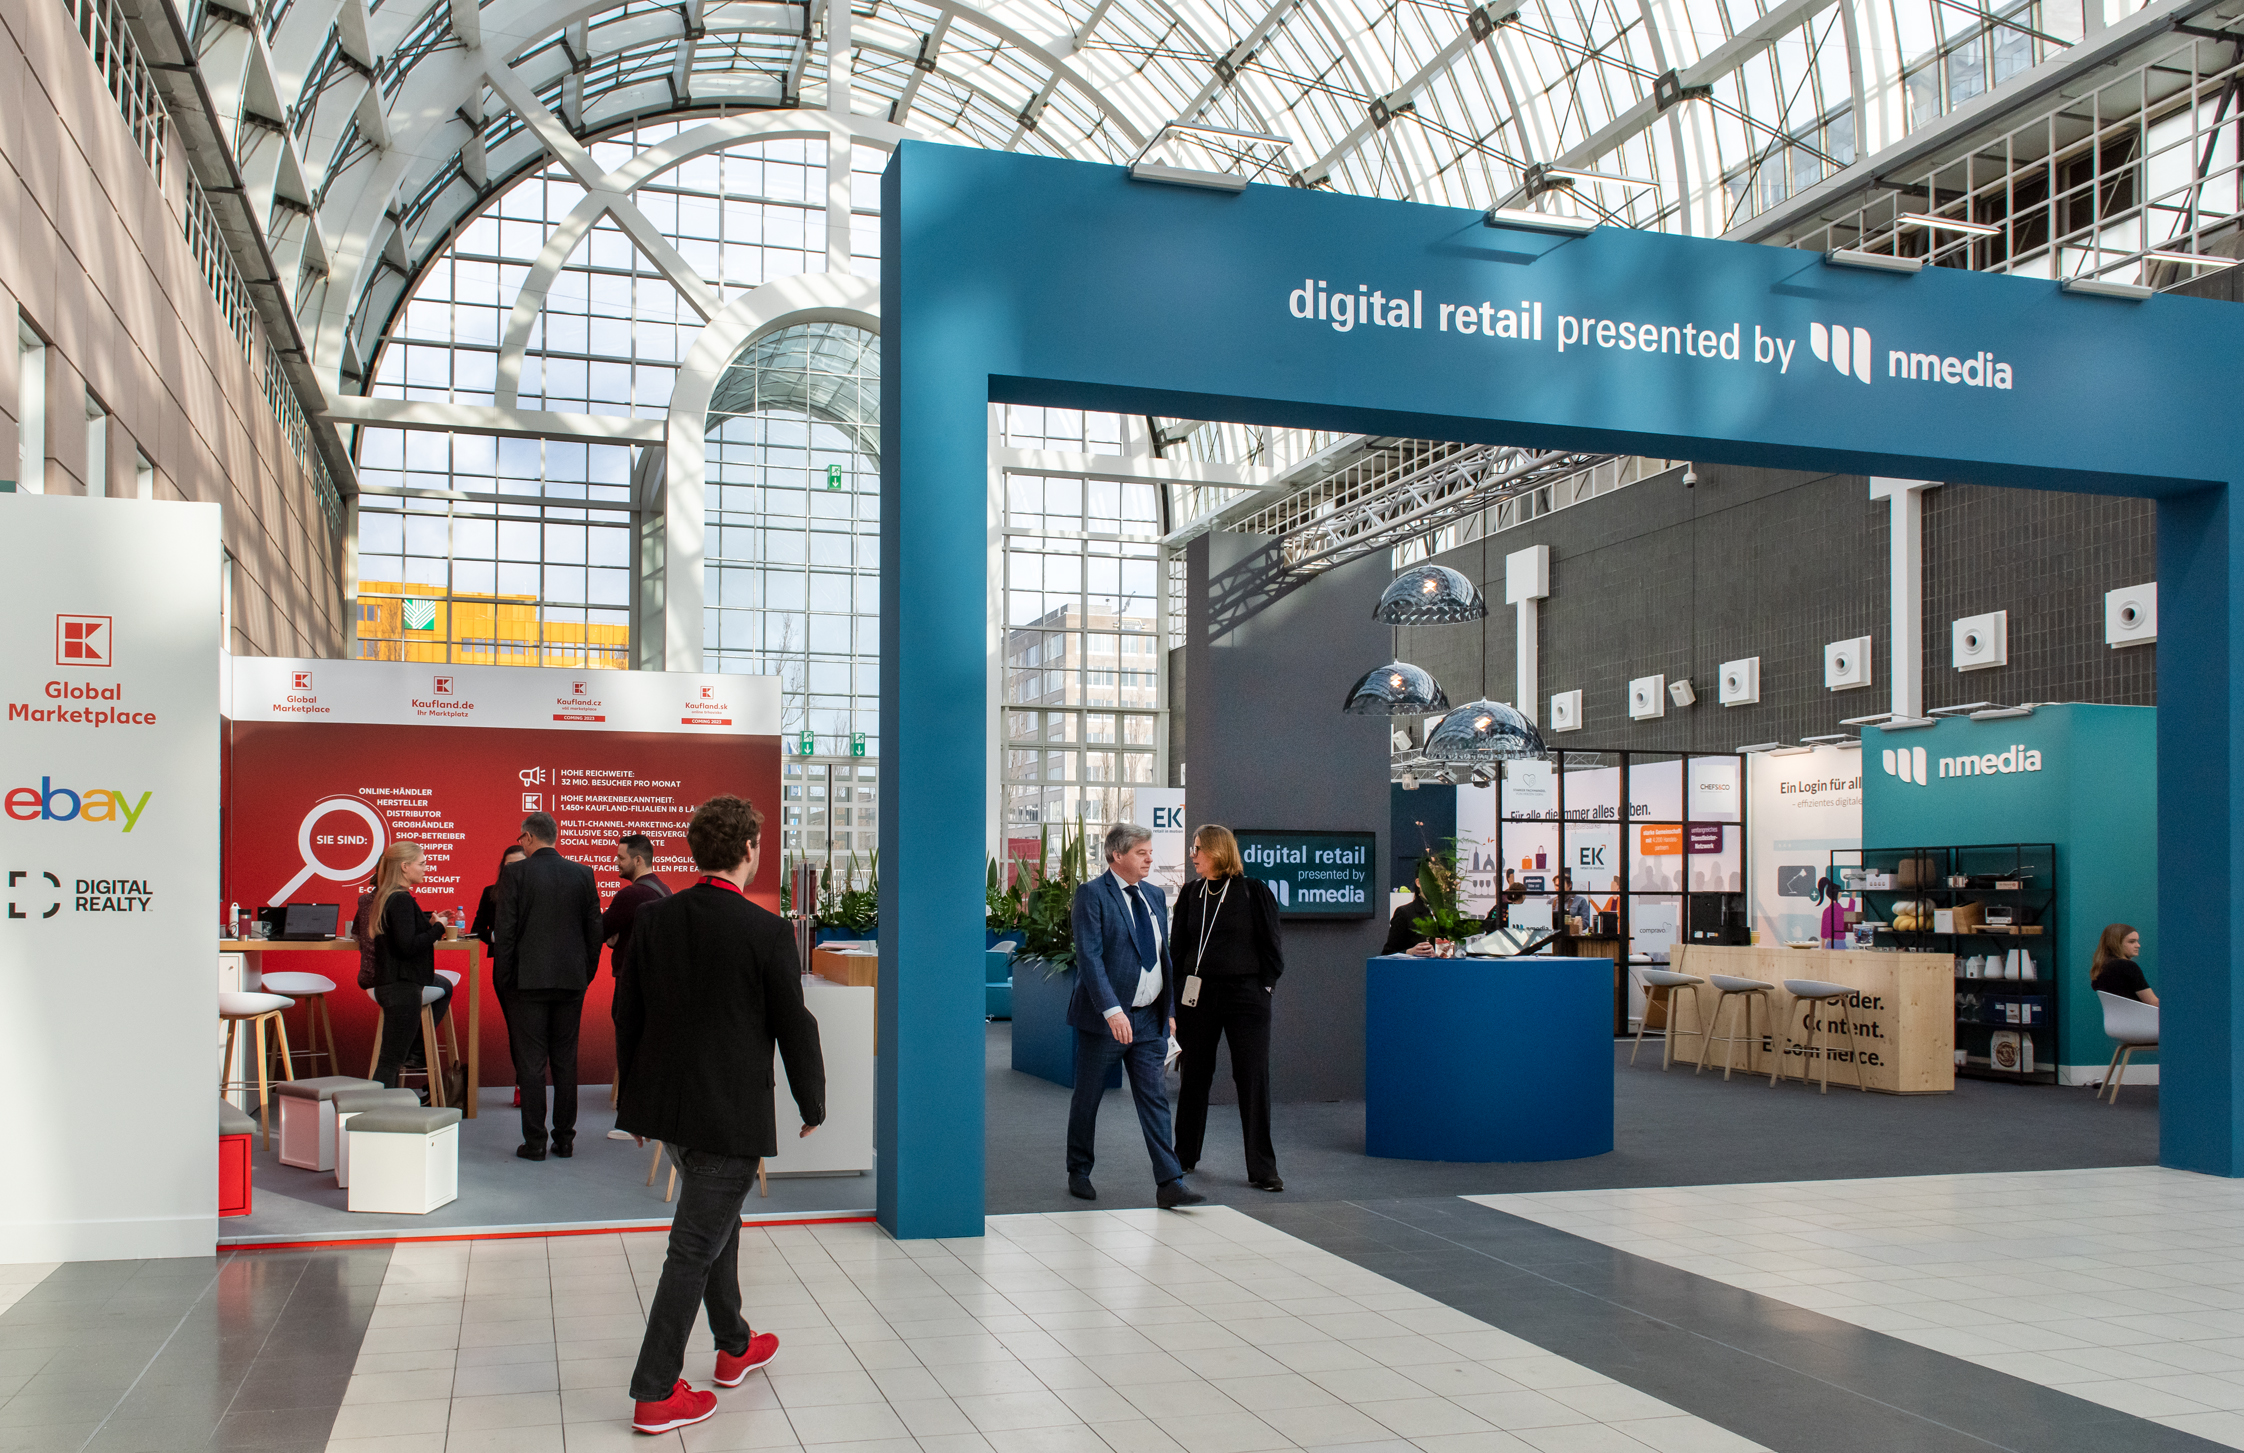 Digital retail presented by nmedia - Areal